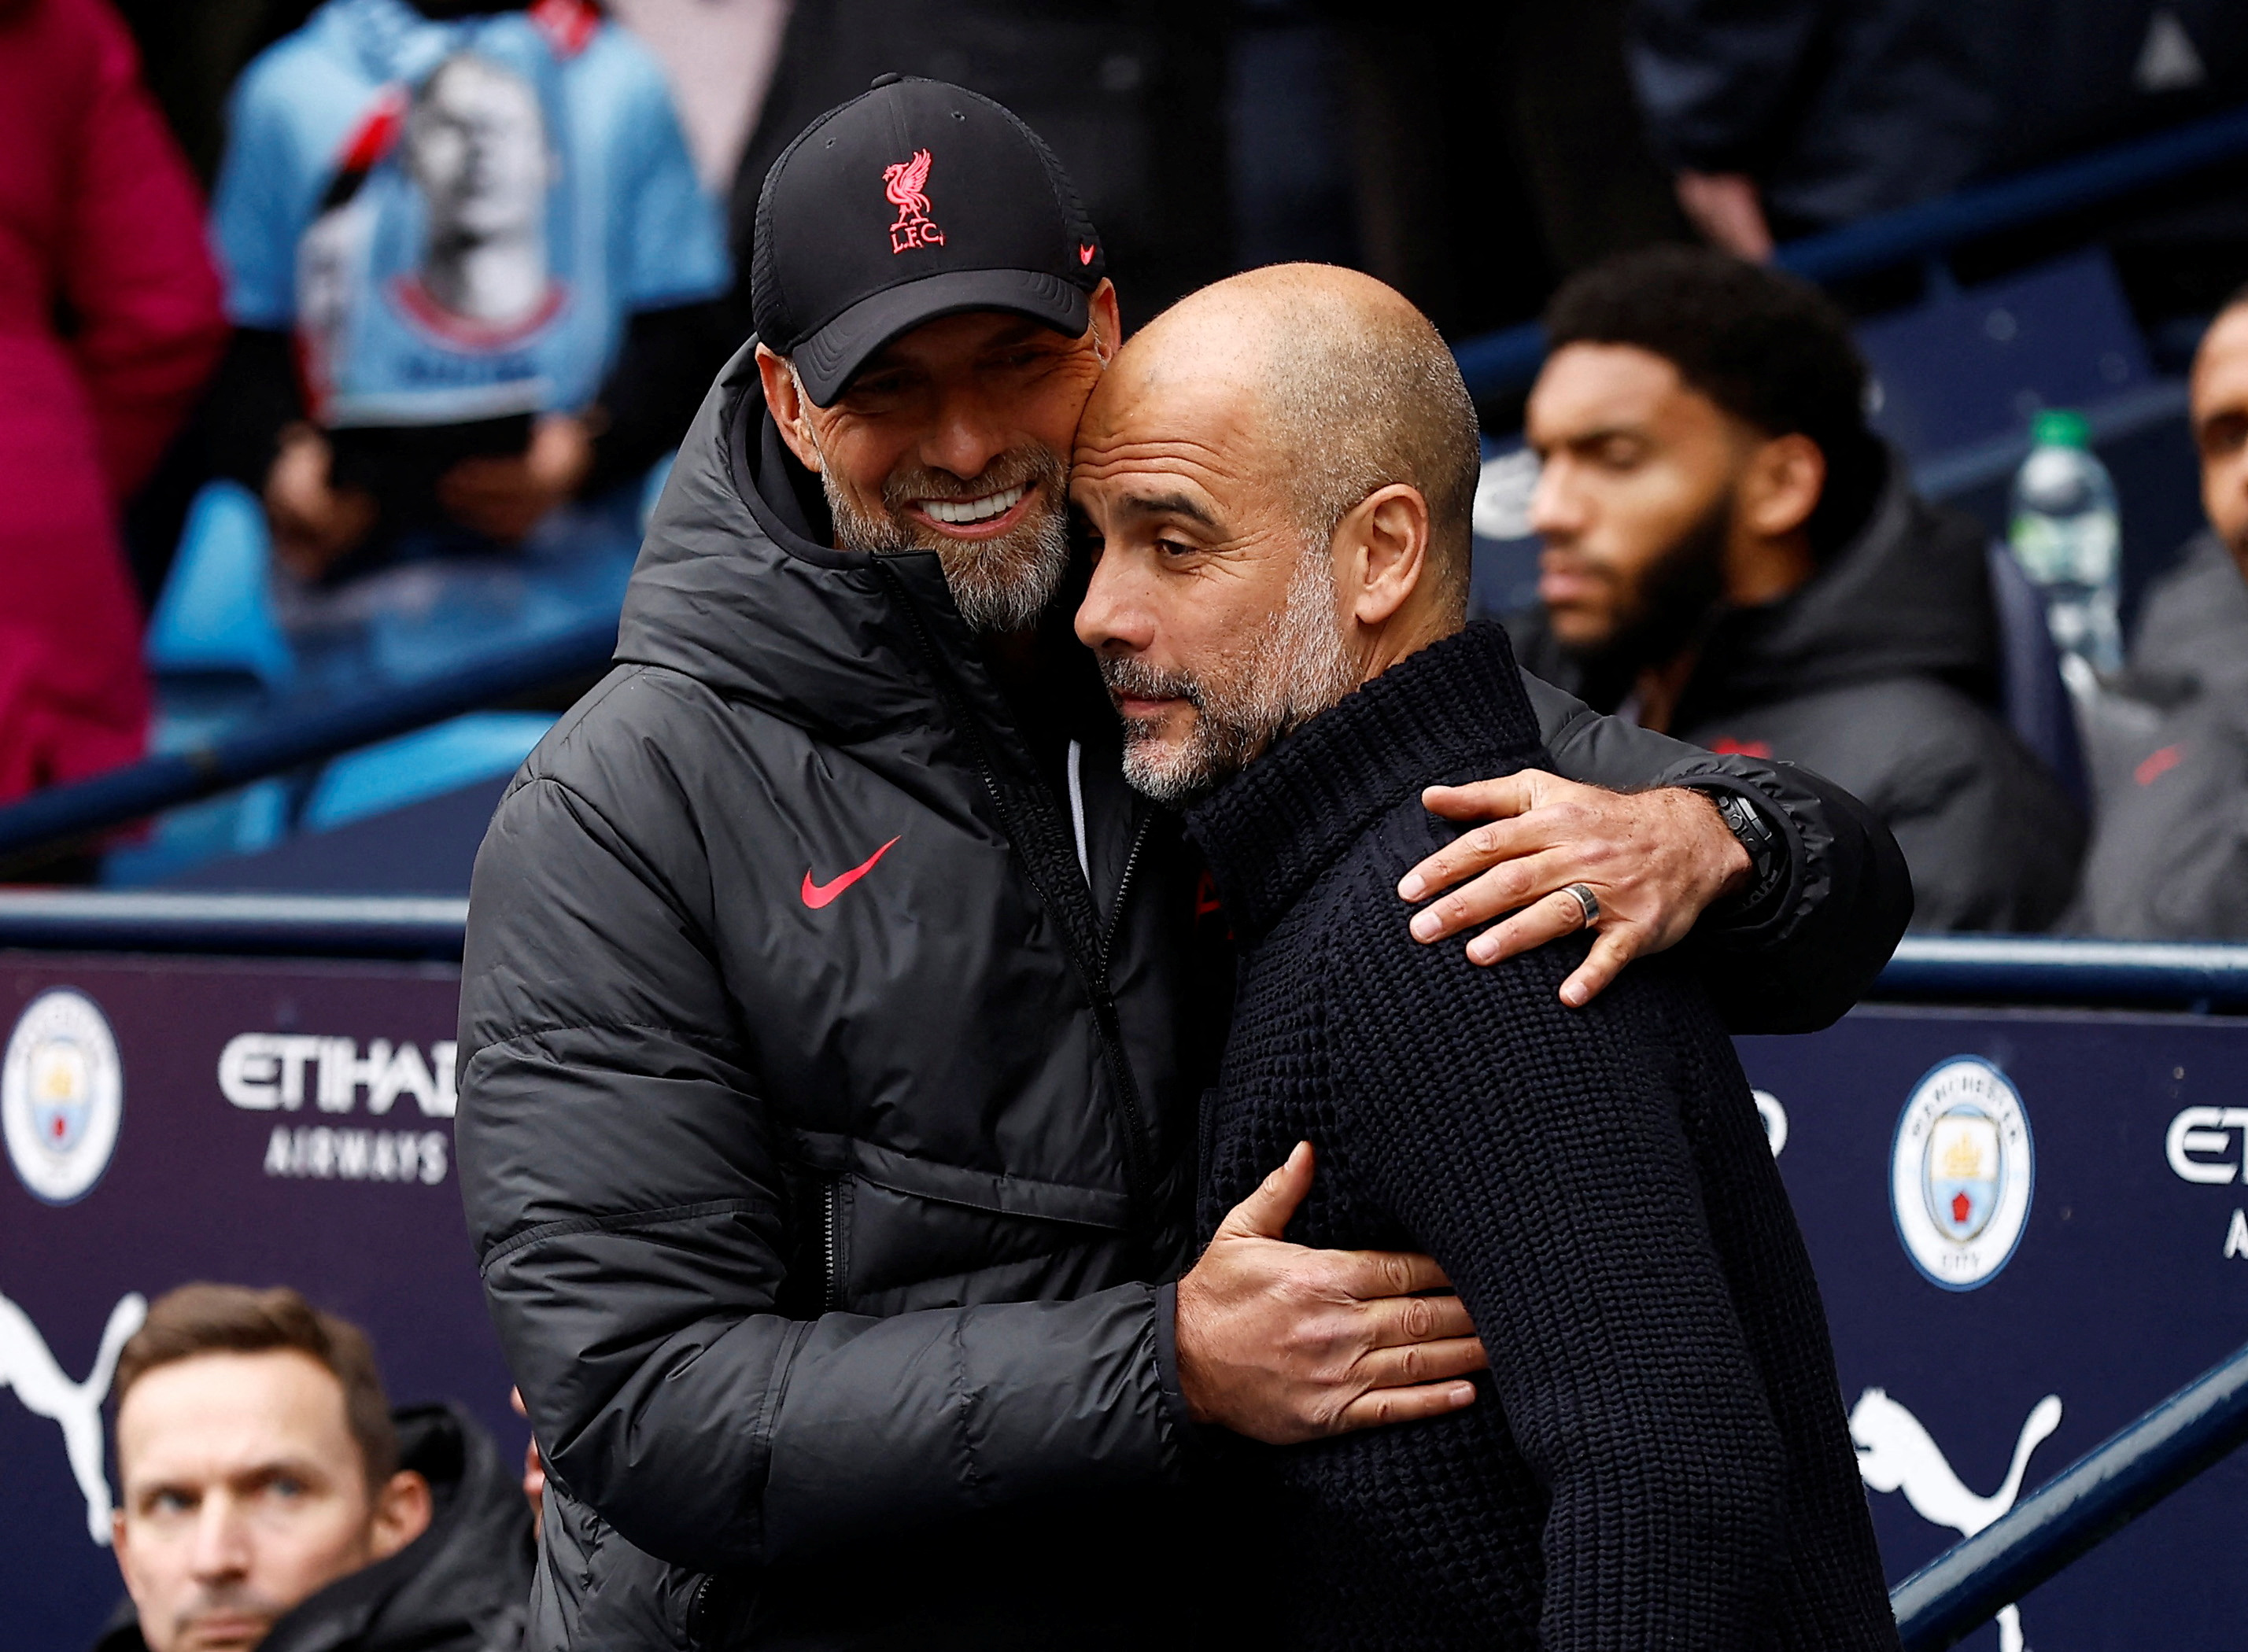 Either Liverpool chief Jurgen Klopp or Man City manager Pep Guardiola might not be smiling like this come Sunday evening